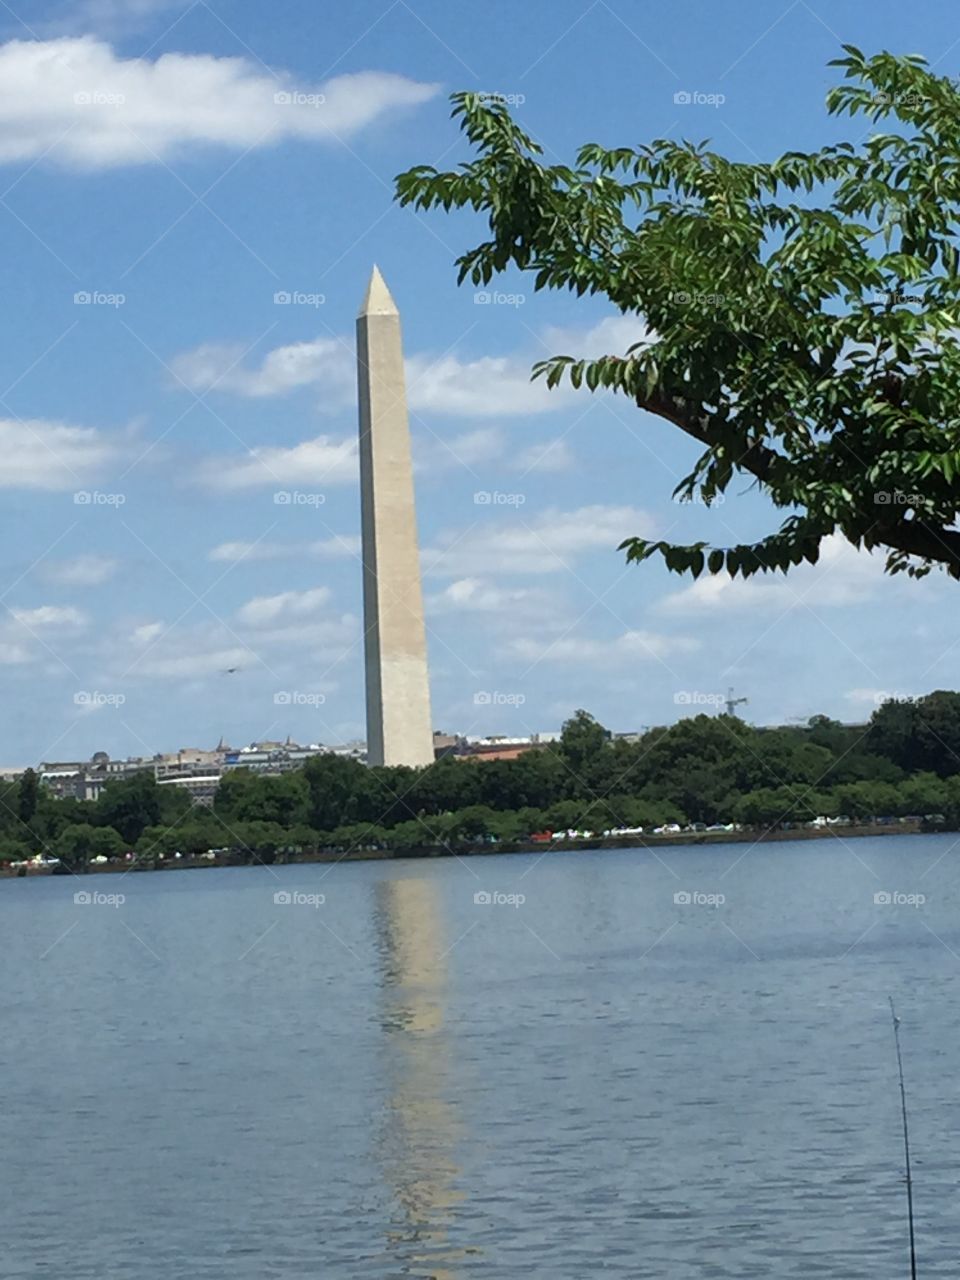 The Washington Monument in DC 